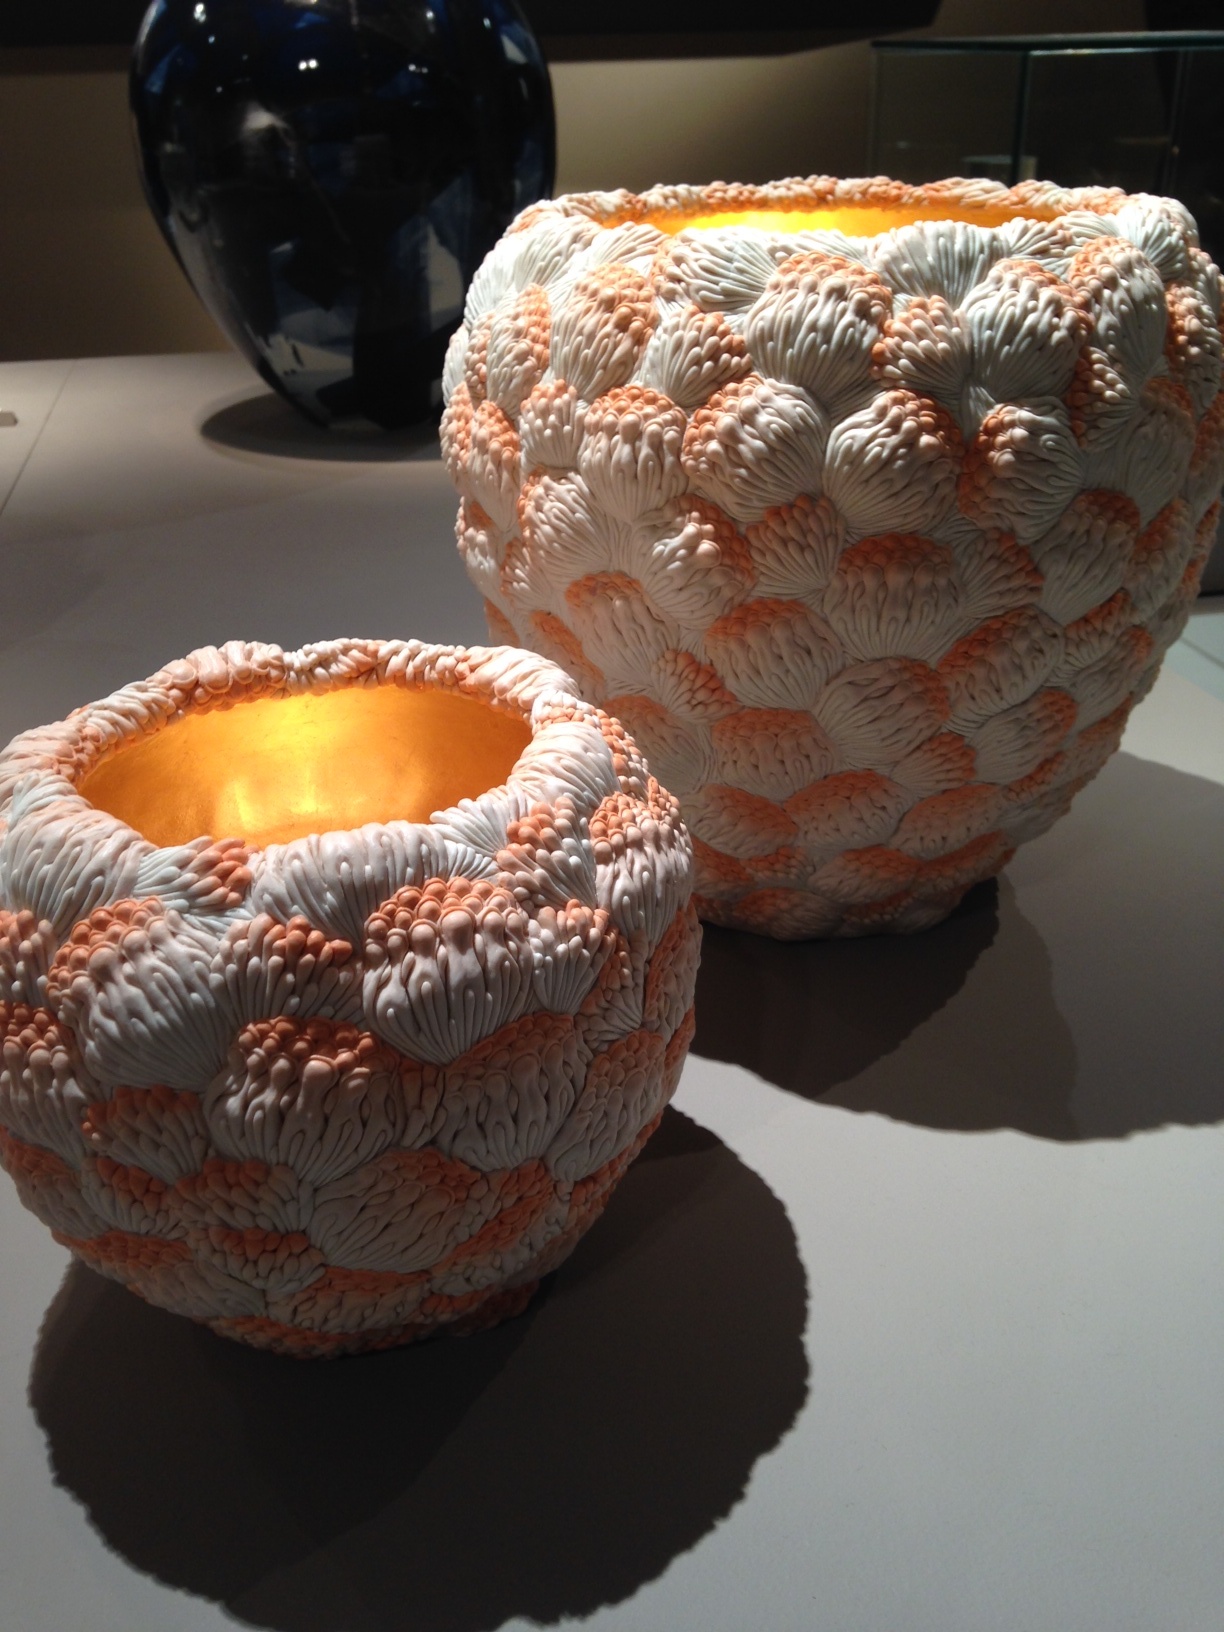 Hitomi Hosono's Orange Coral Bowls, 2014, Molded, carved, and hand-built colored porcelain with red gold leaf interior. Adrian Sasoon Gallery, London.